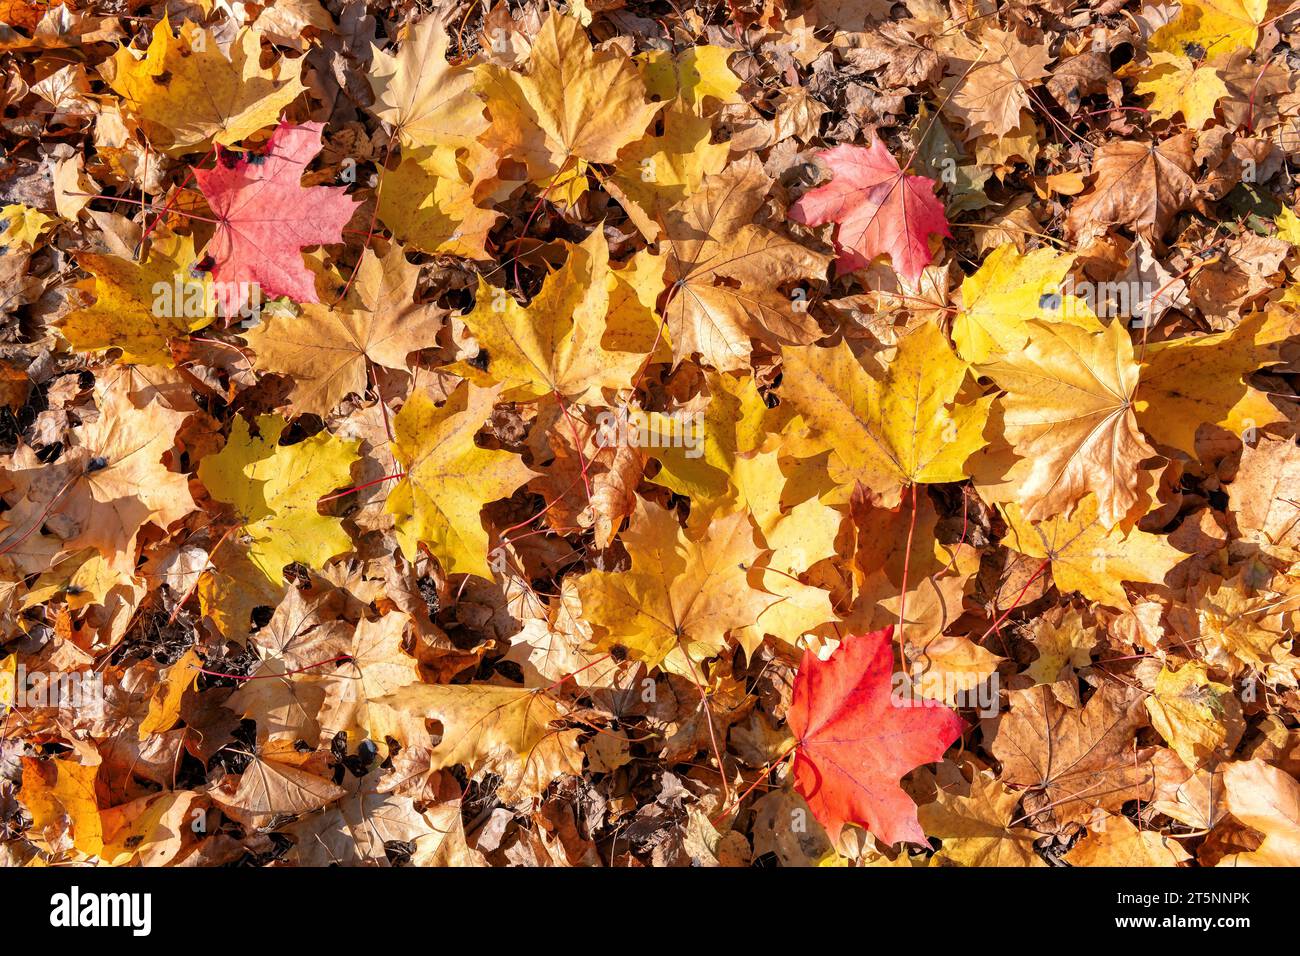 Autumn yellow maple leaves background. Colorful background image of fallen autumn leaves. Stock Photo